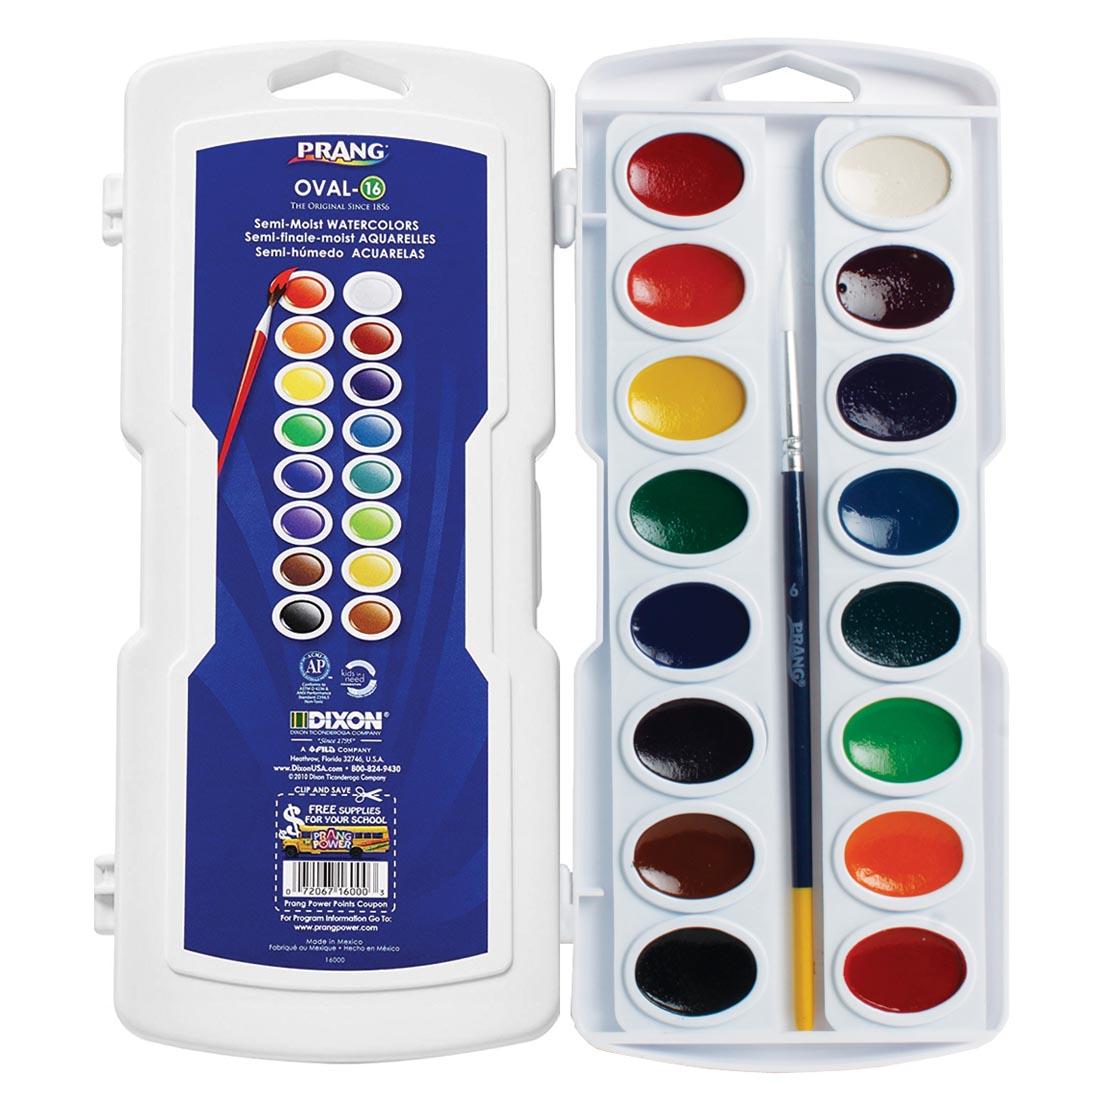 Prang Semi-Moist Watercolors 16-Color Oval Pan Set Package Shown Both Closed and Open